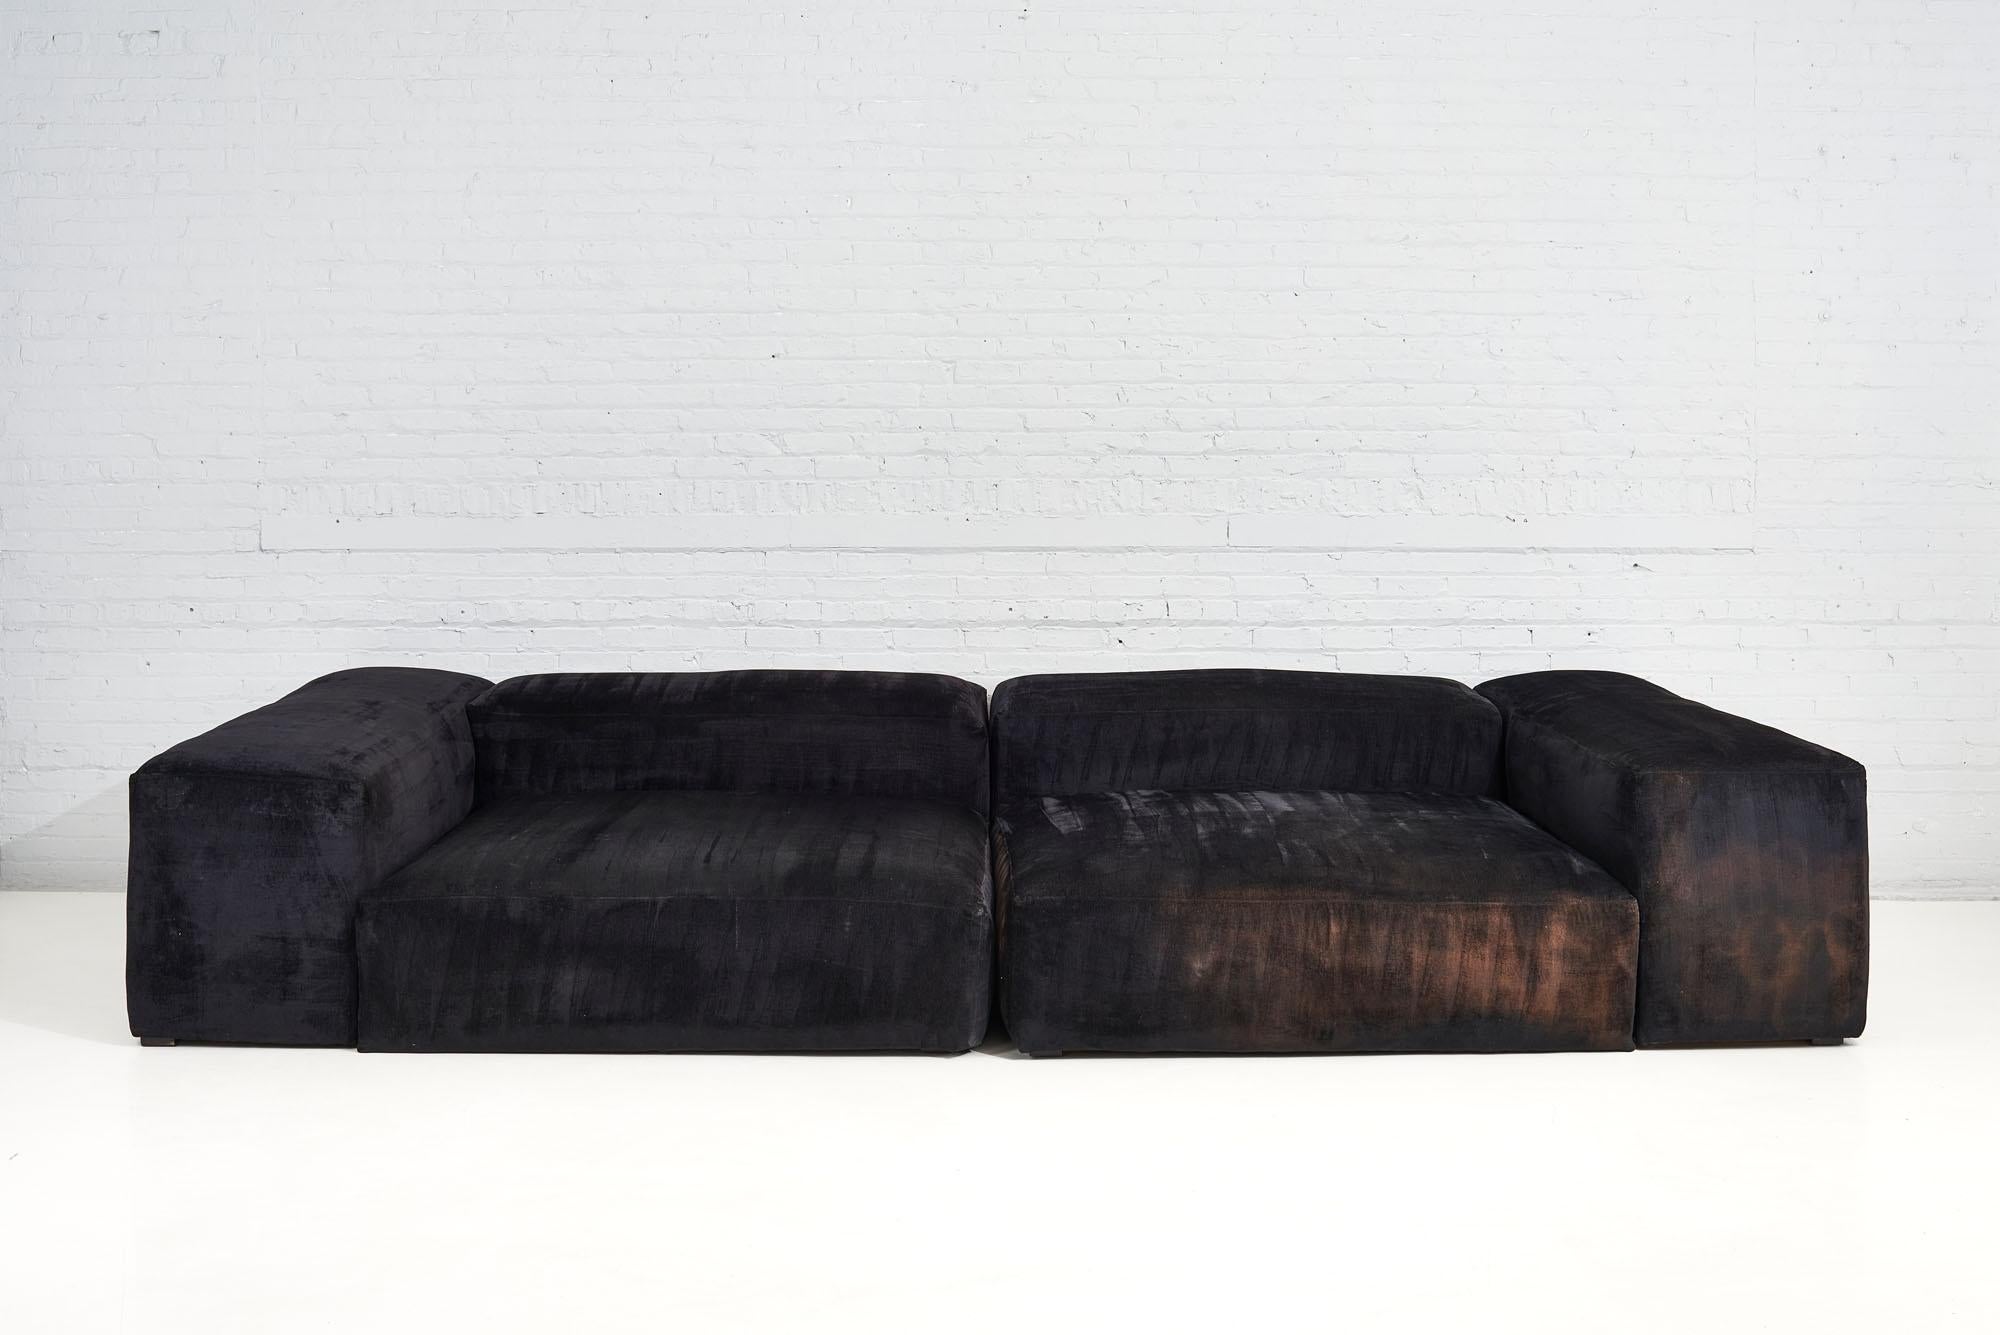 Raphael Raffel Monumental black sofa, 1980. Wear consistent with age and use, sun fading and discoloration.